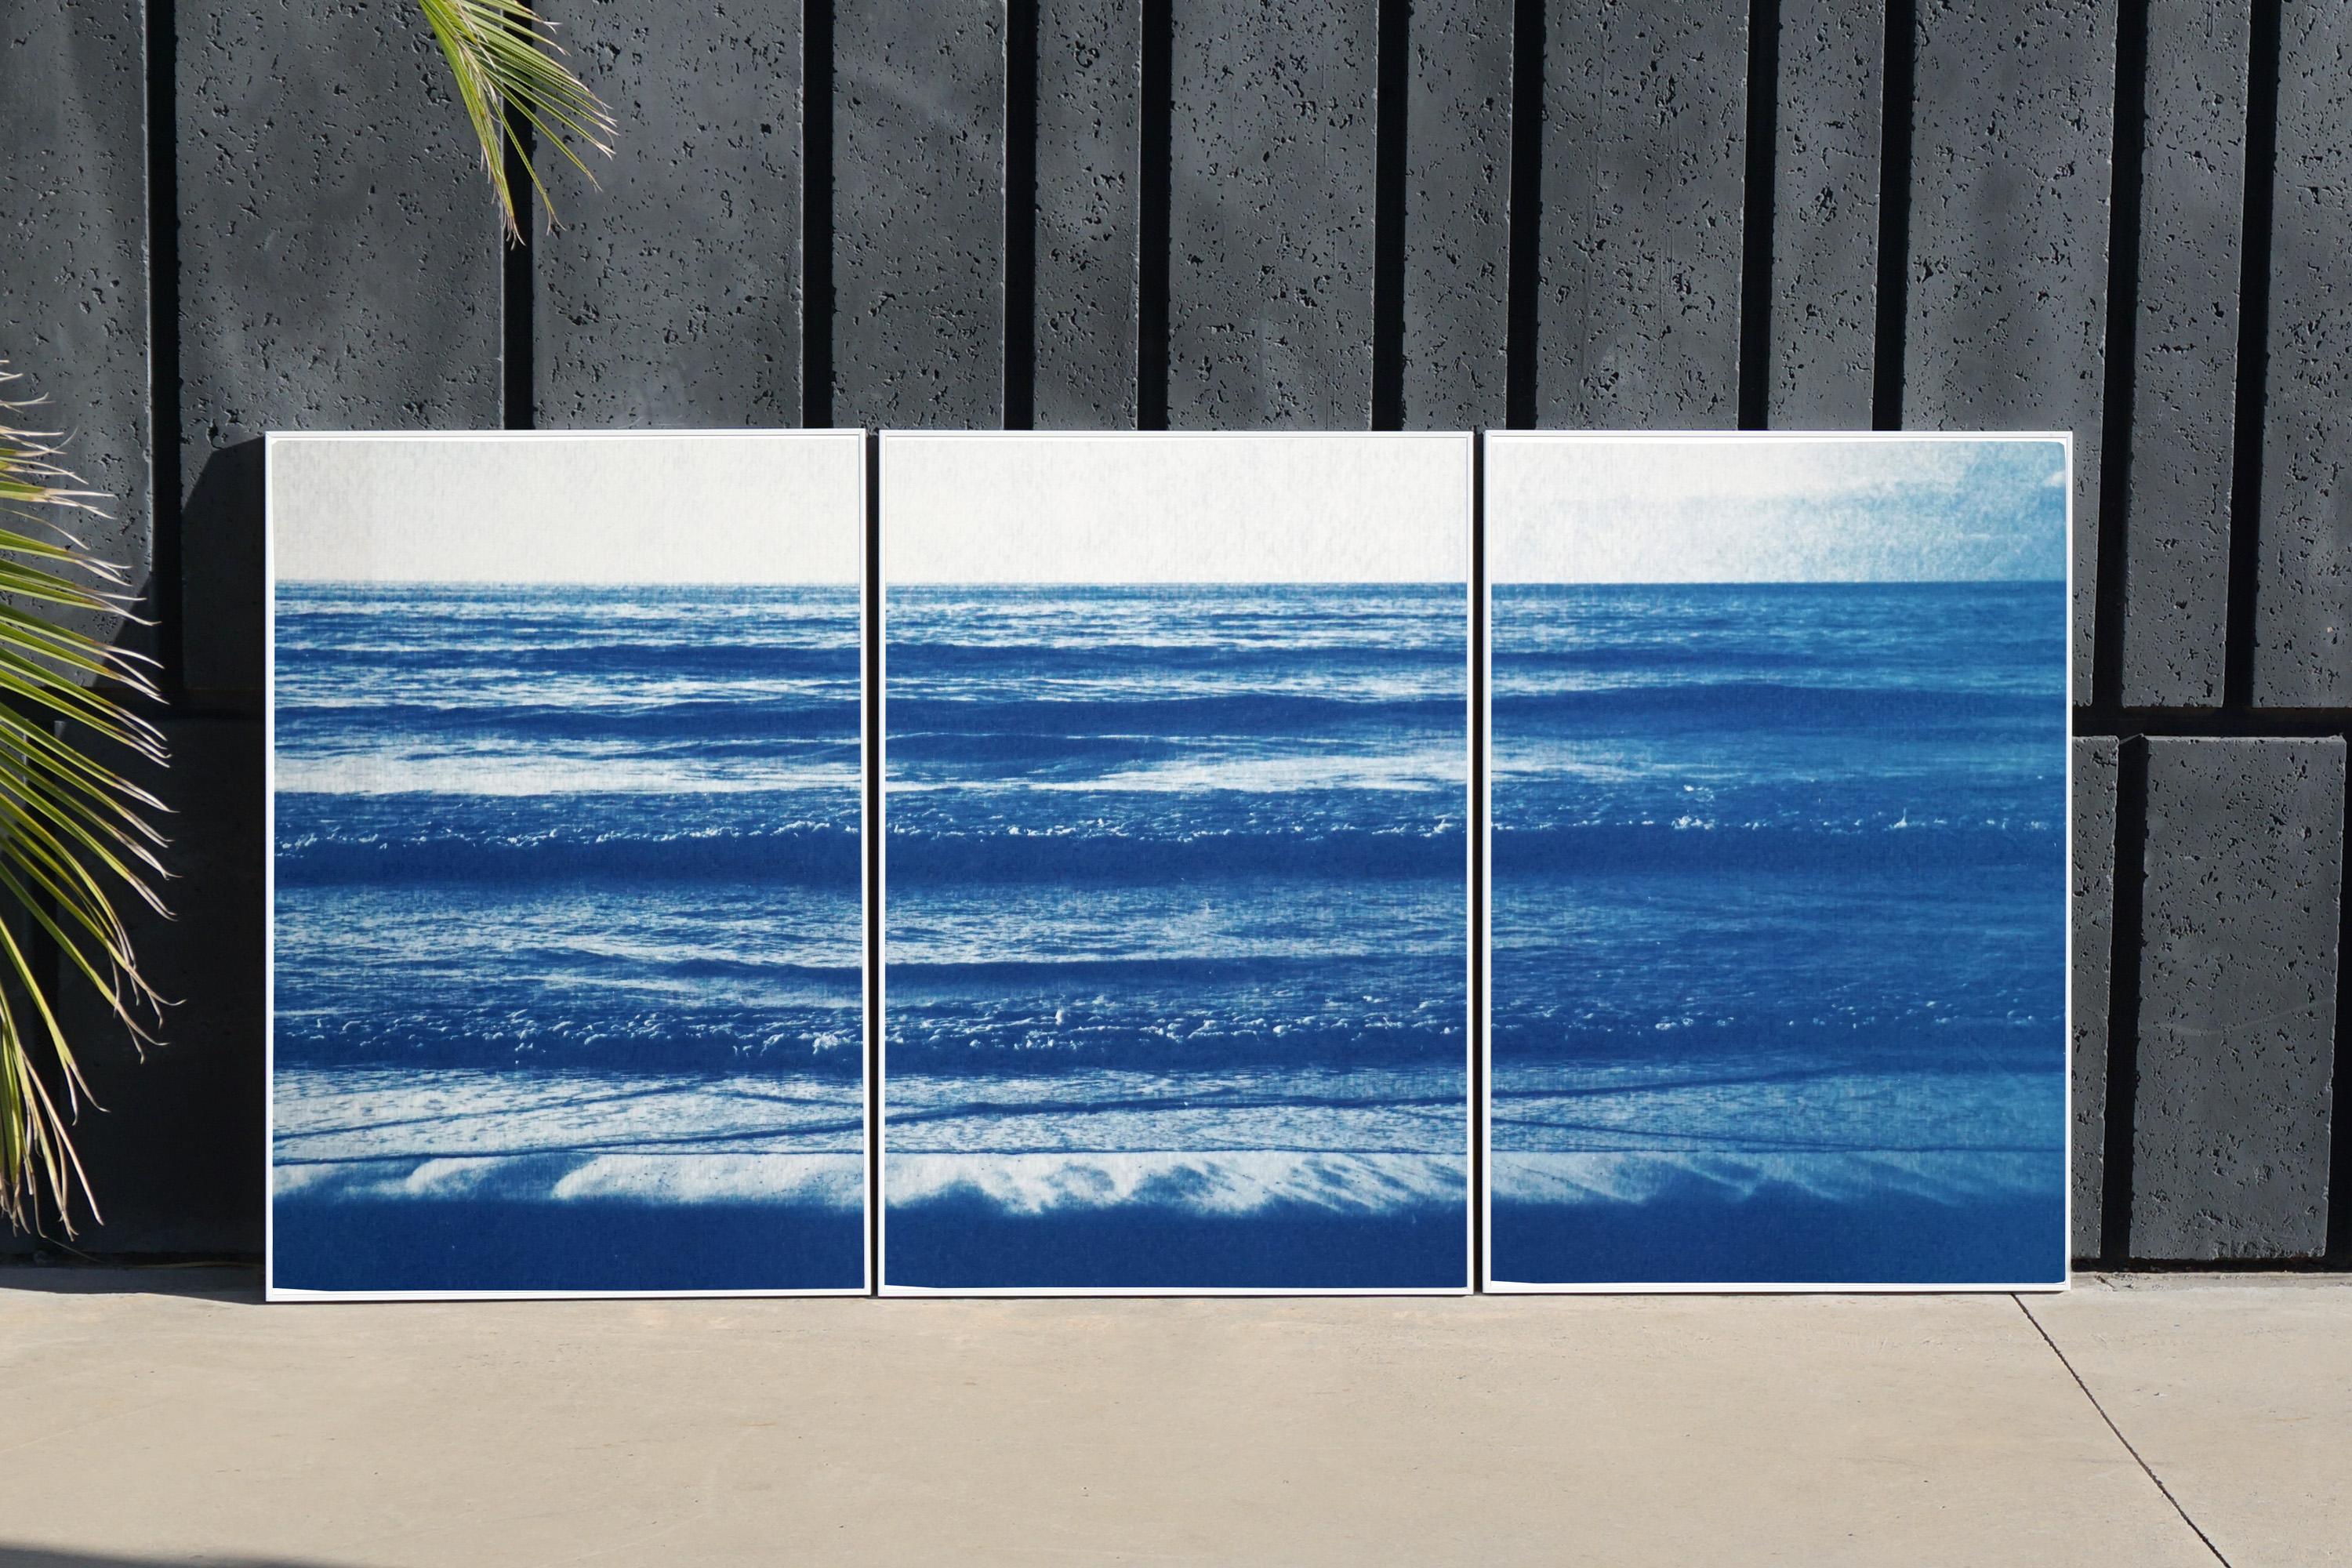 Pacific Beach Horizon, Nautical Triptych Cyanotype, White and Blue Seascape, Zen - Contemporary Photograph by Kind of Cyan